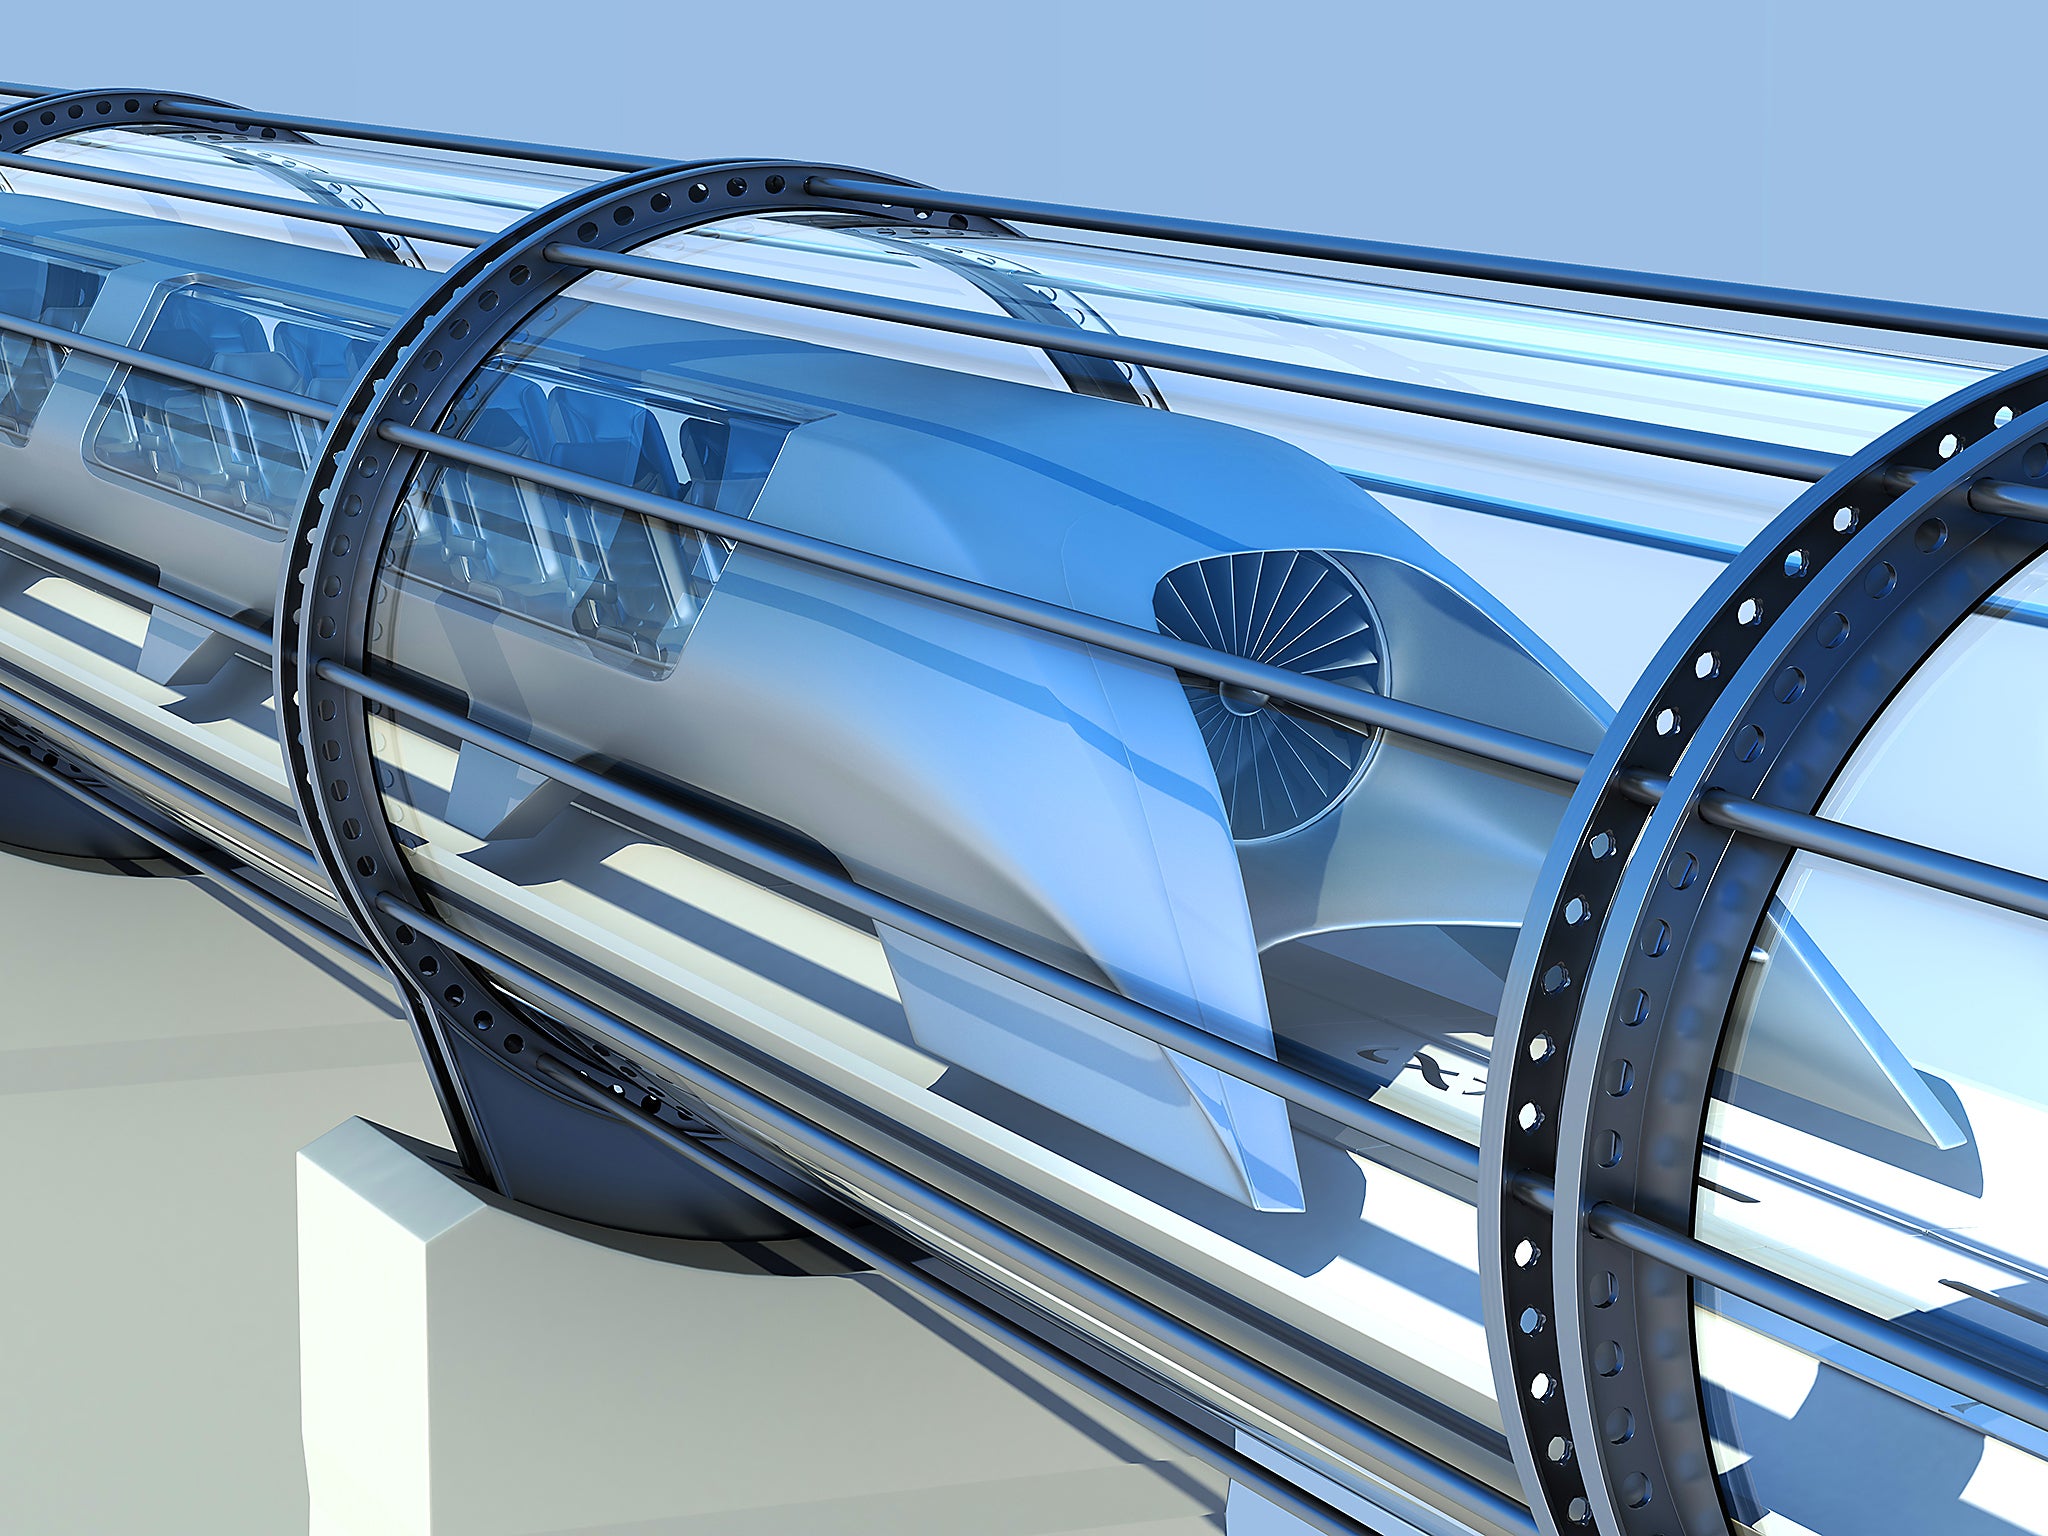 An artist's impression of a monorail tunnel